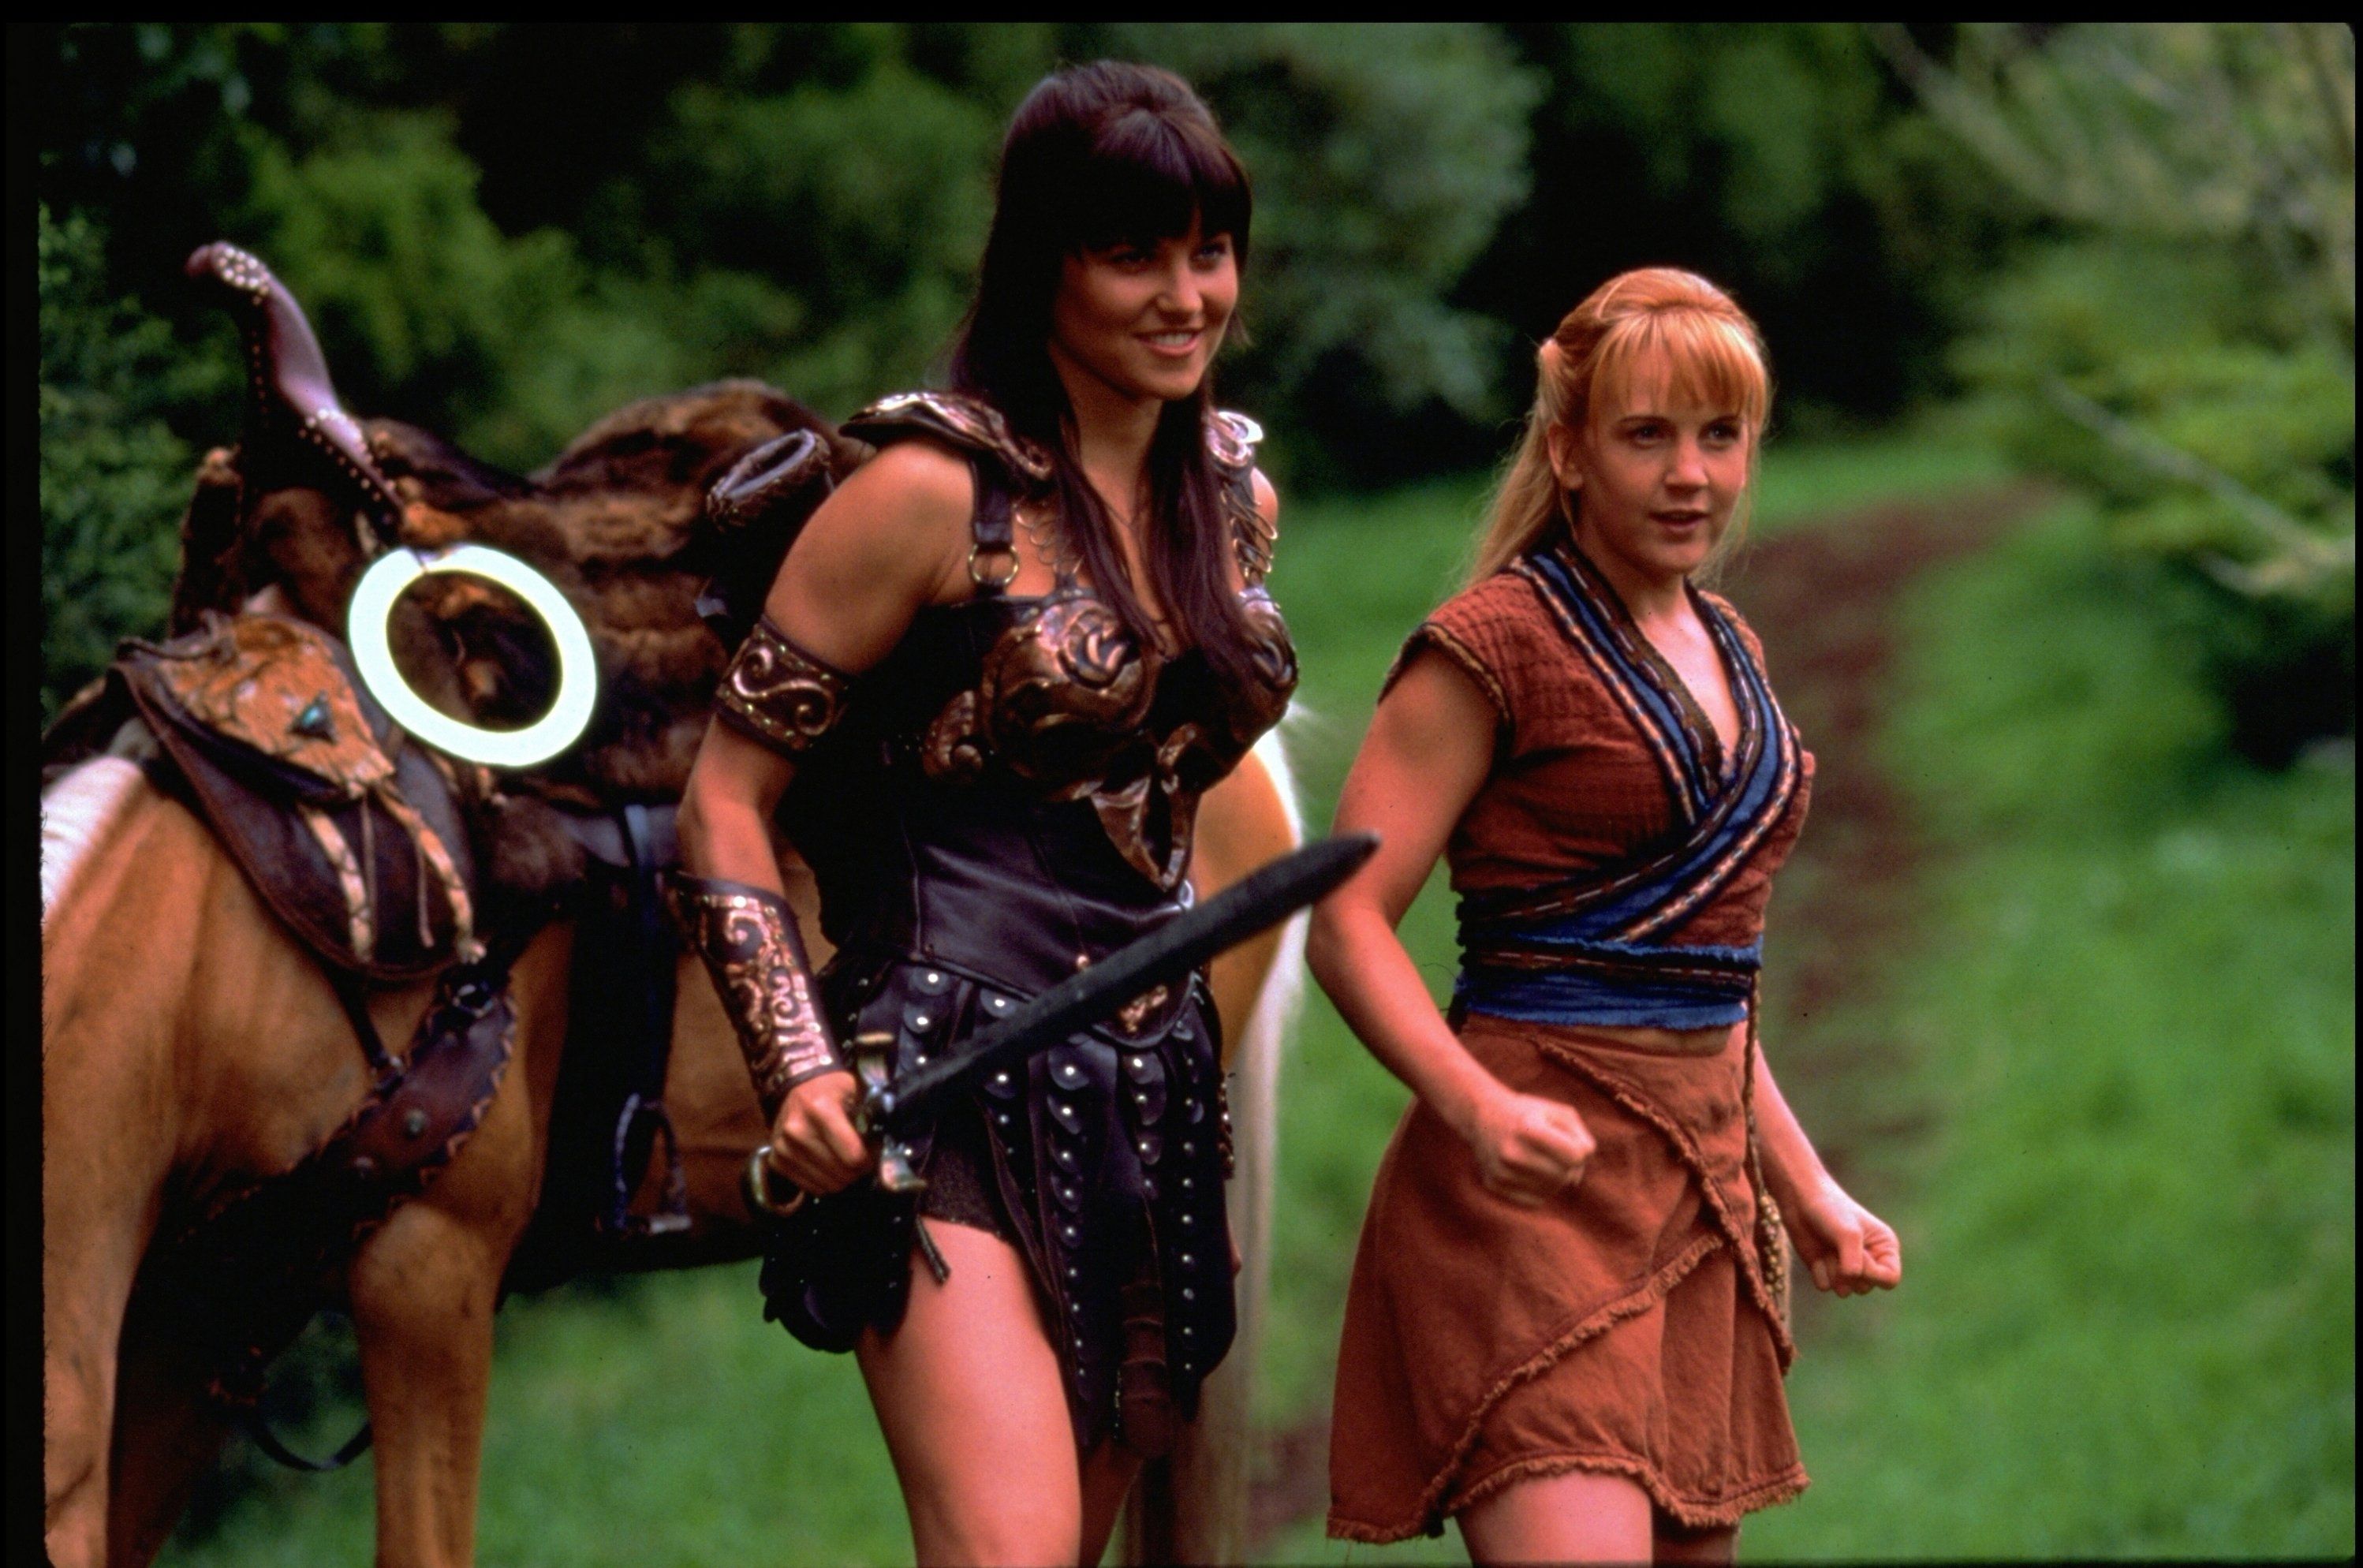 Lucy Lawless and Renee O'Connor in Xena